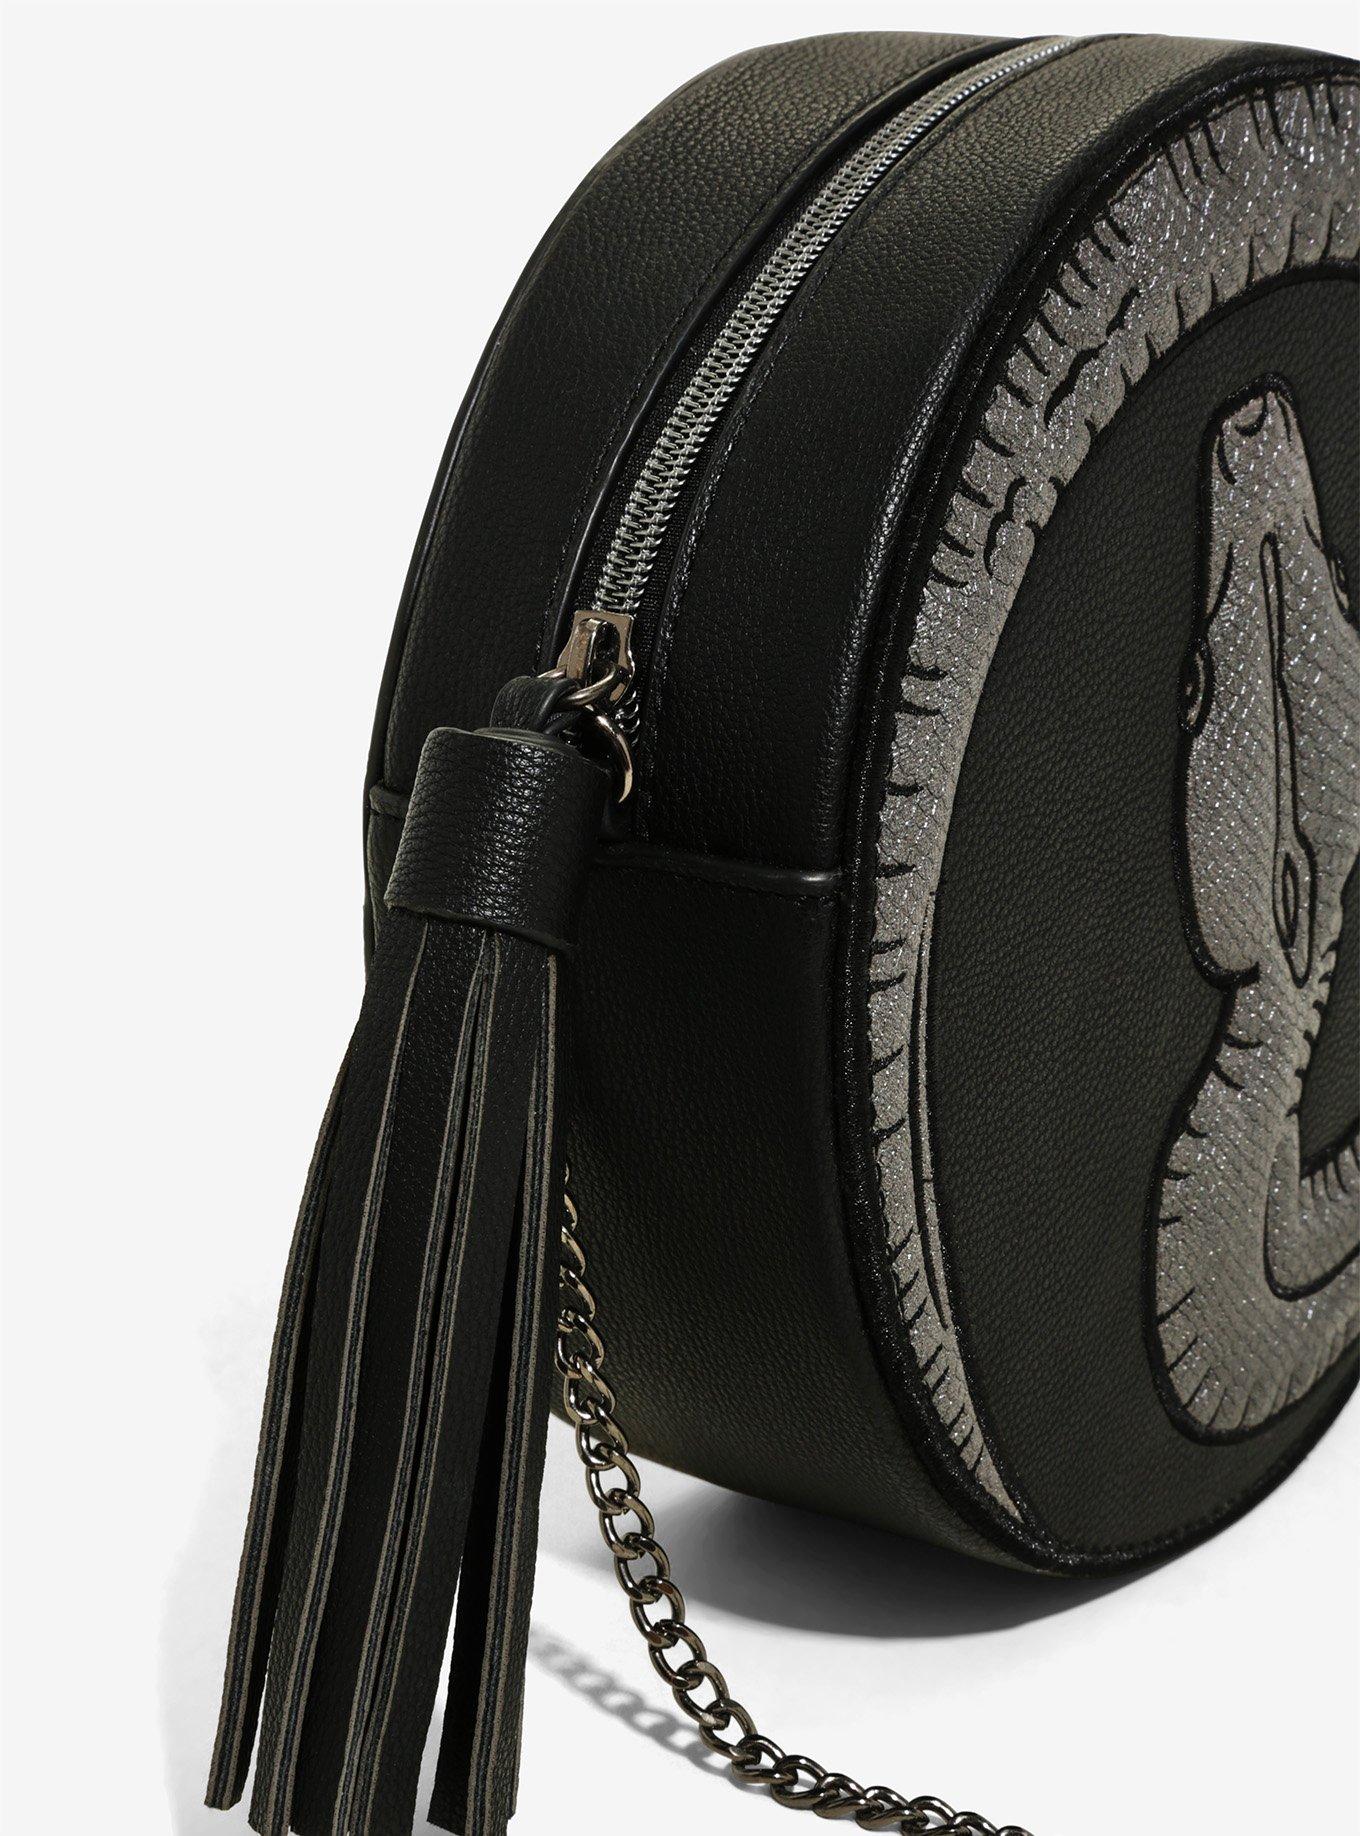 Danielle Nicole Harry Potter Horcrux Collection Nagini Round Crossbody Bag - BoxLunch Exclusive, , alternate